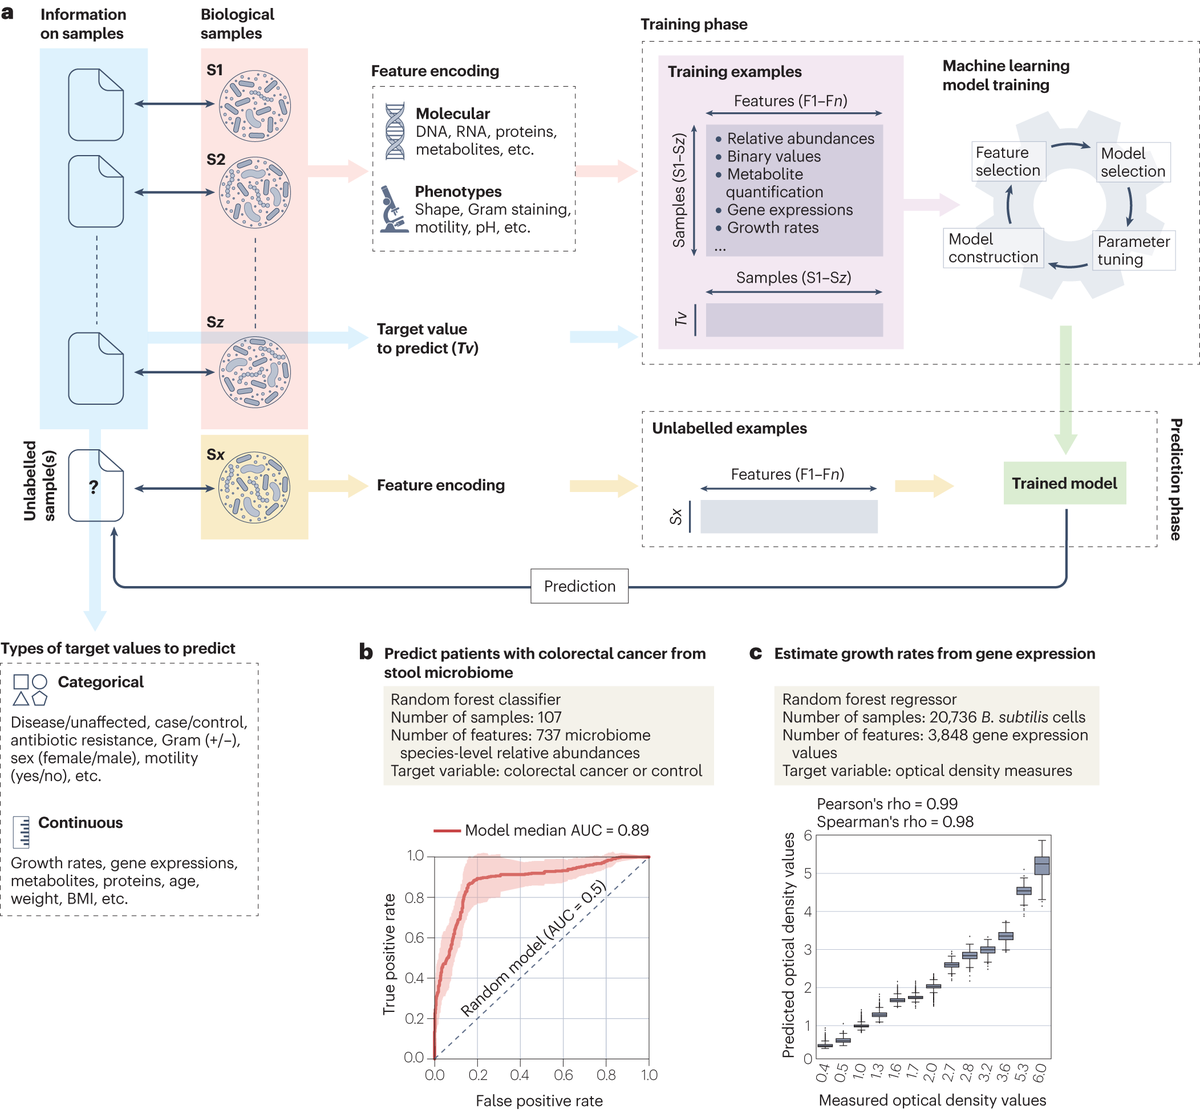 A Review in @NatureRevMicro examines the main machine learning concepts, tasks and applications that are relevant for experimental and clinical microbiologists. 🔒 go.nature.com/47xzB2G